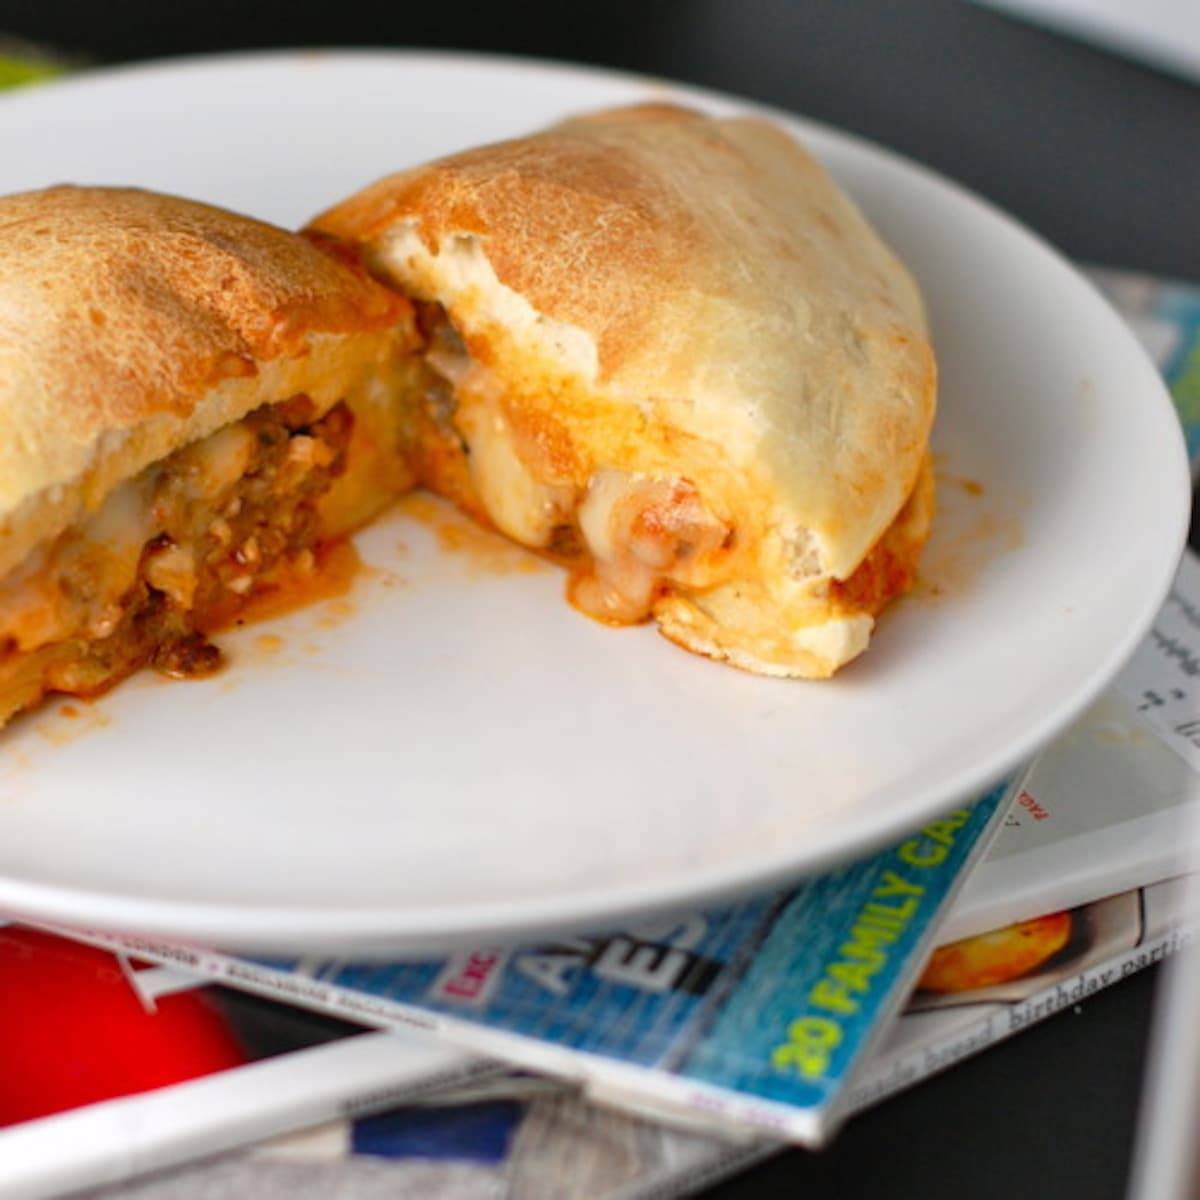 Sausage and mozzarella calzones on a white plate on top of magazines.